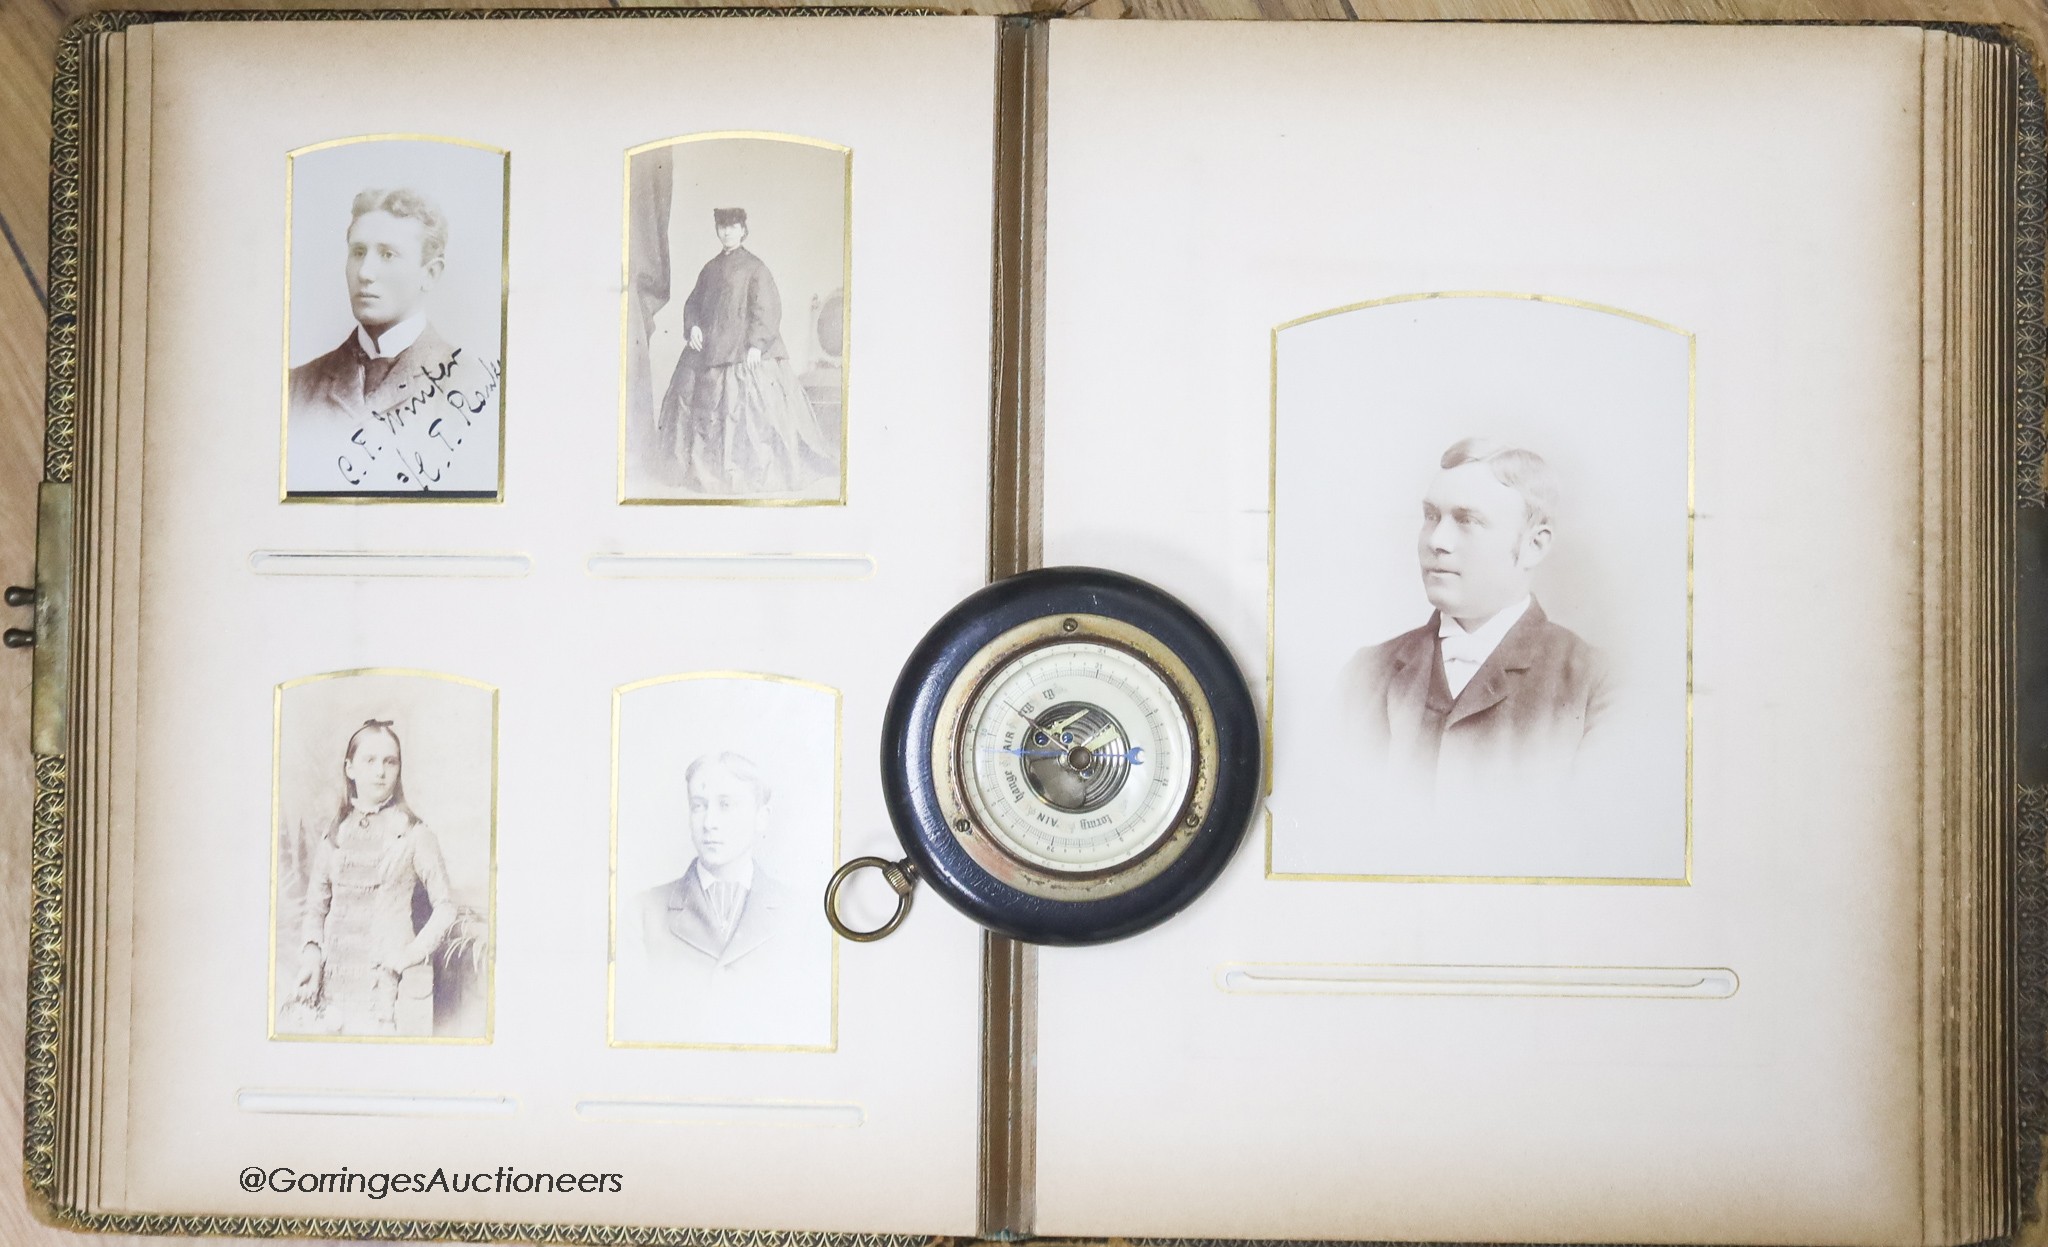 A Victorian monochrome photograph album and an aneroid barometer